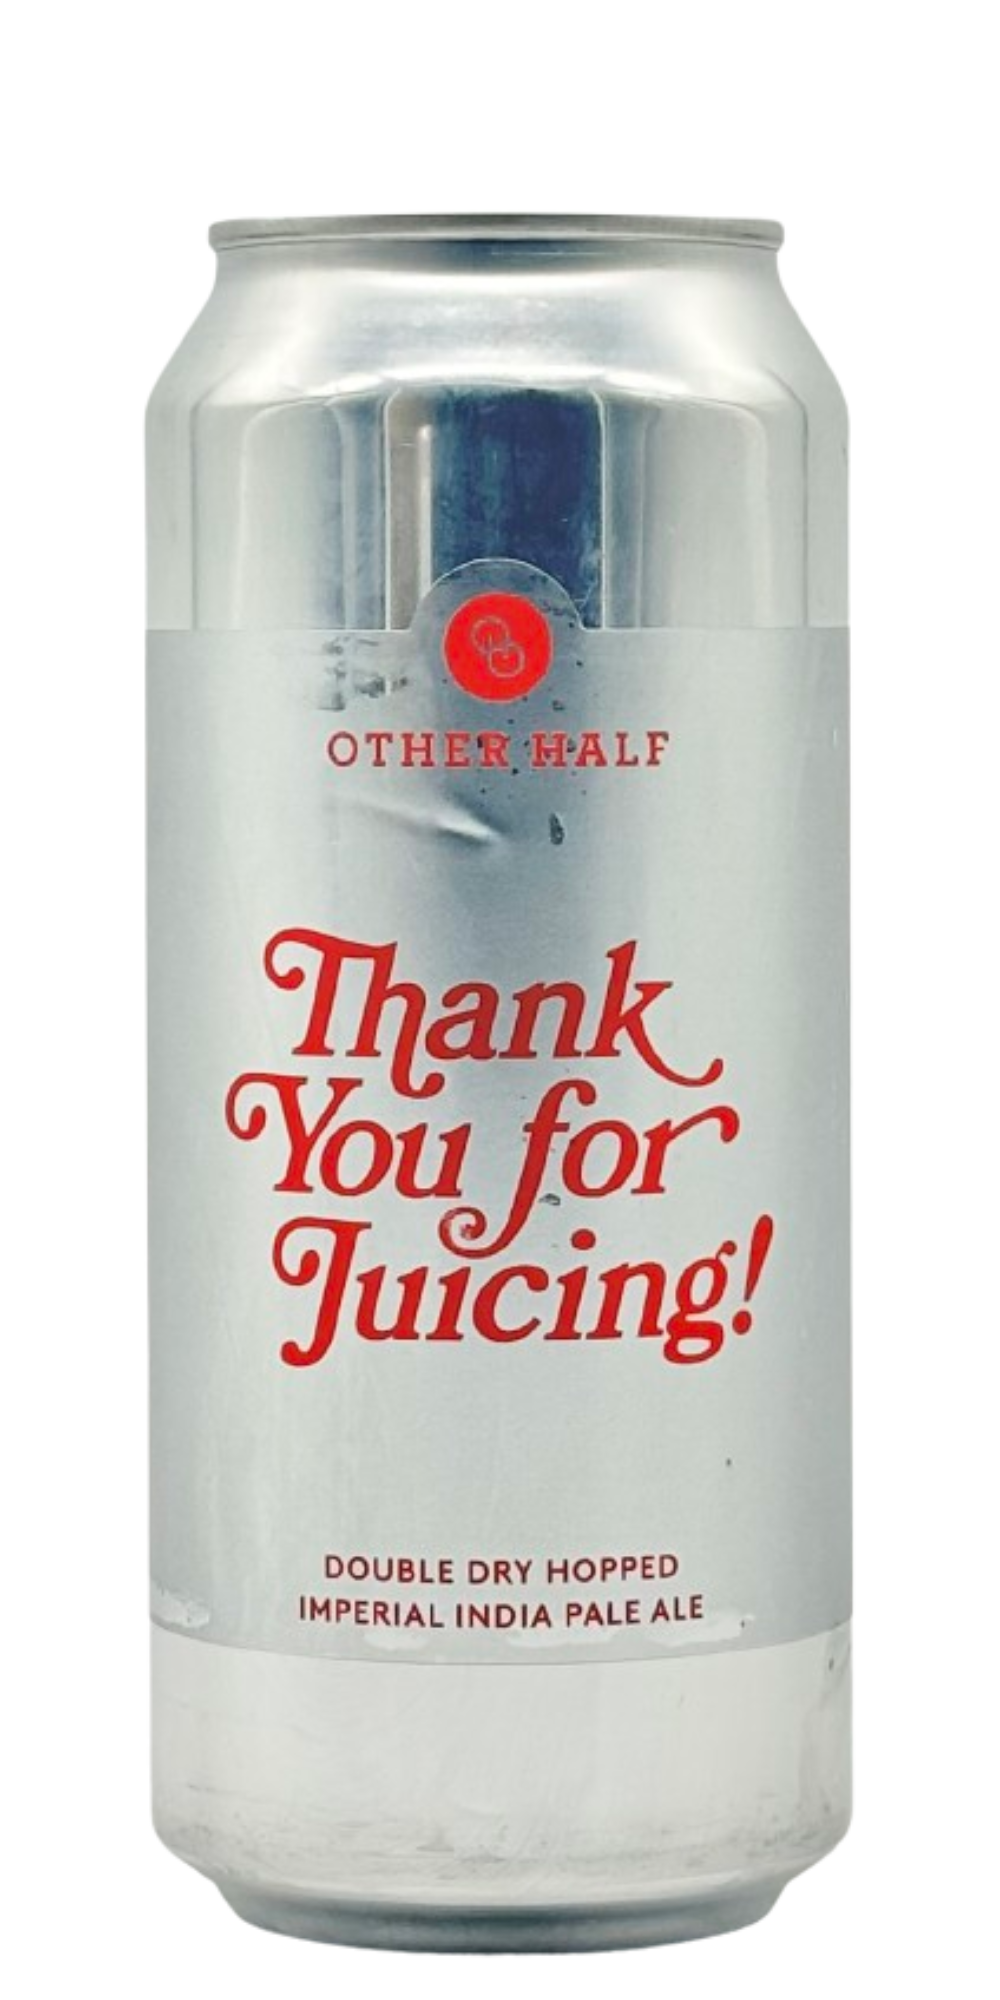 Other Half - Thank You for Juicing!